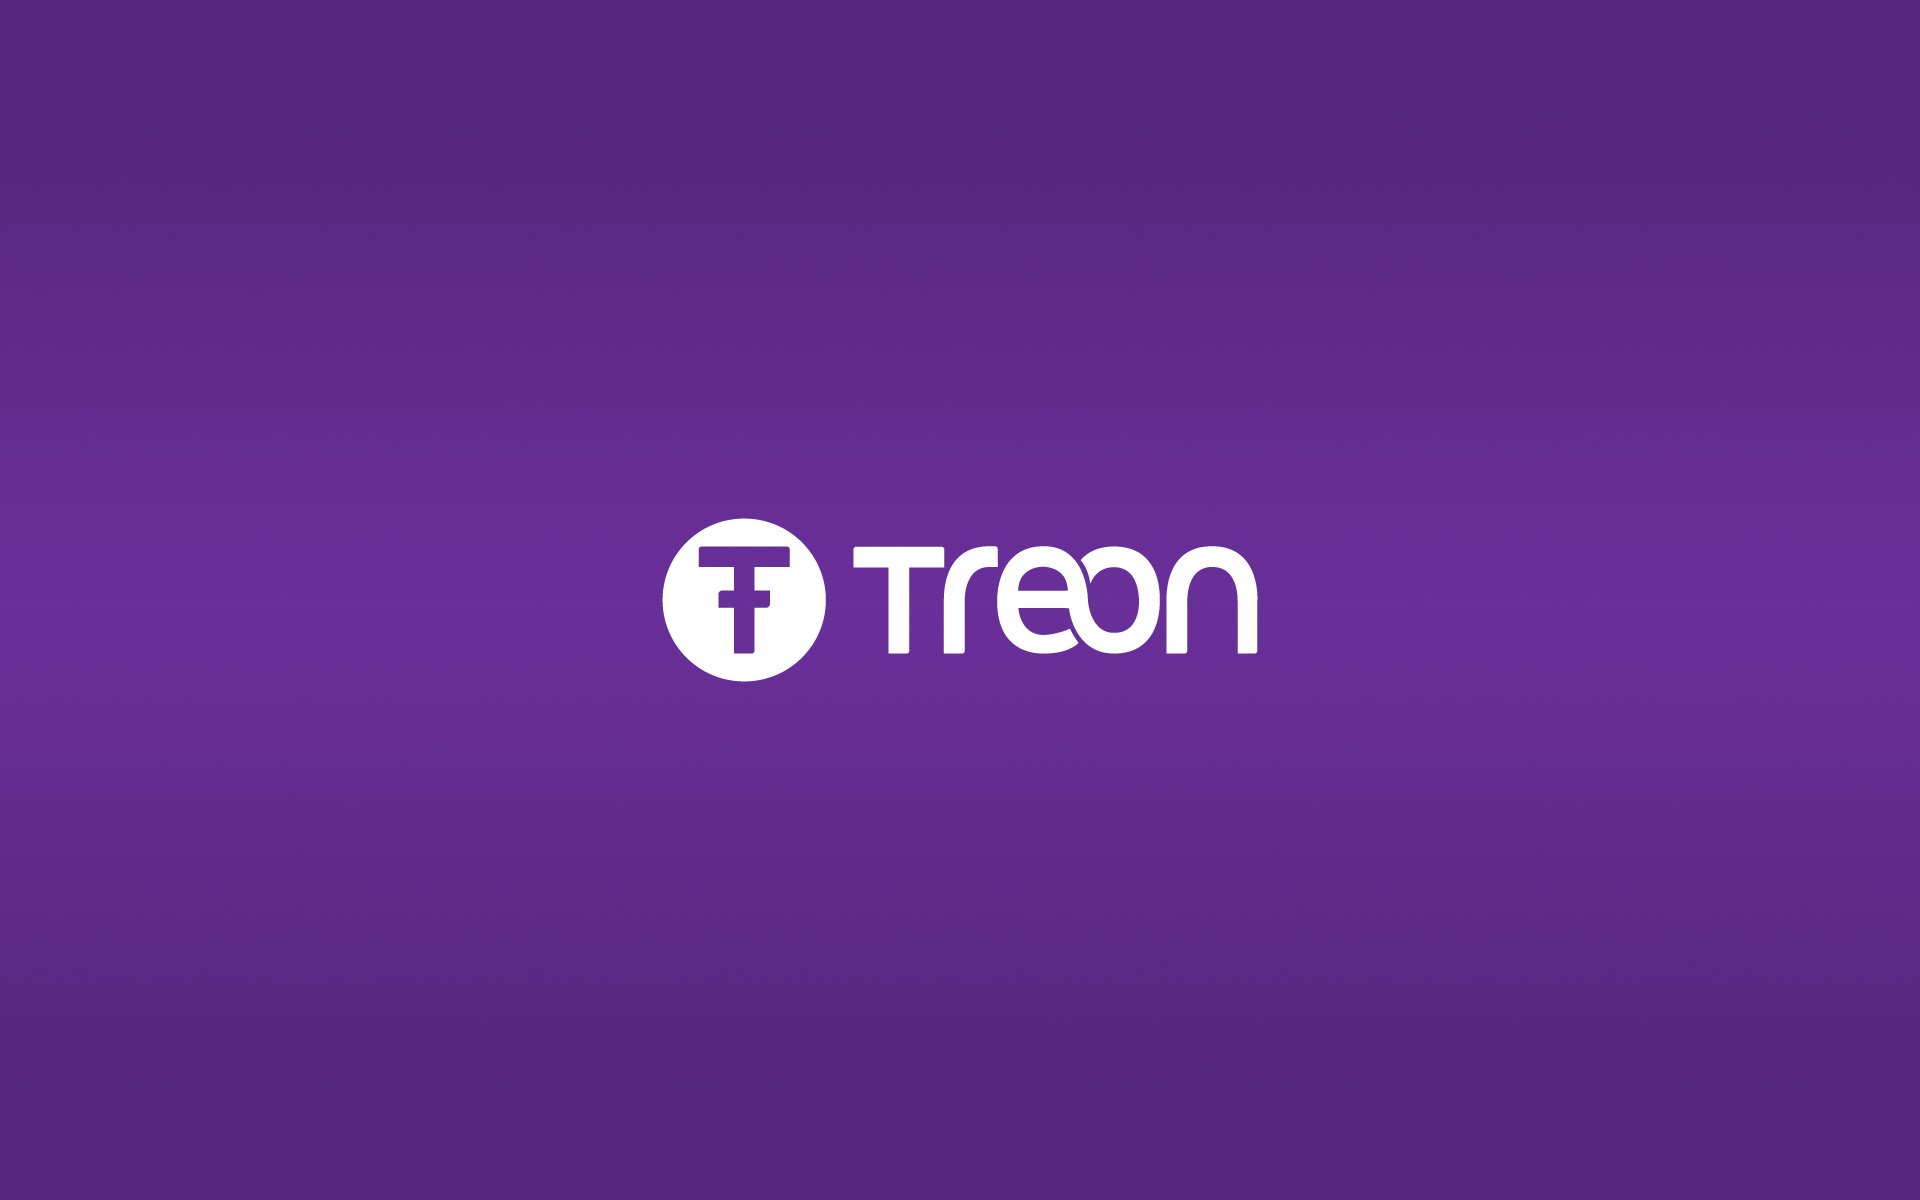 Treon - The First Tokenized Universal Utility Payment Platform Based on The Blockchain is Set to Launch The ICO Pre-Sale on May 21st